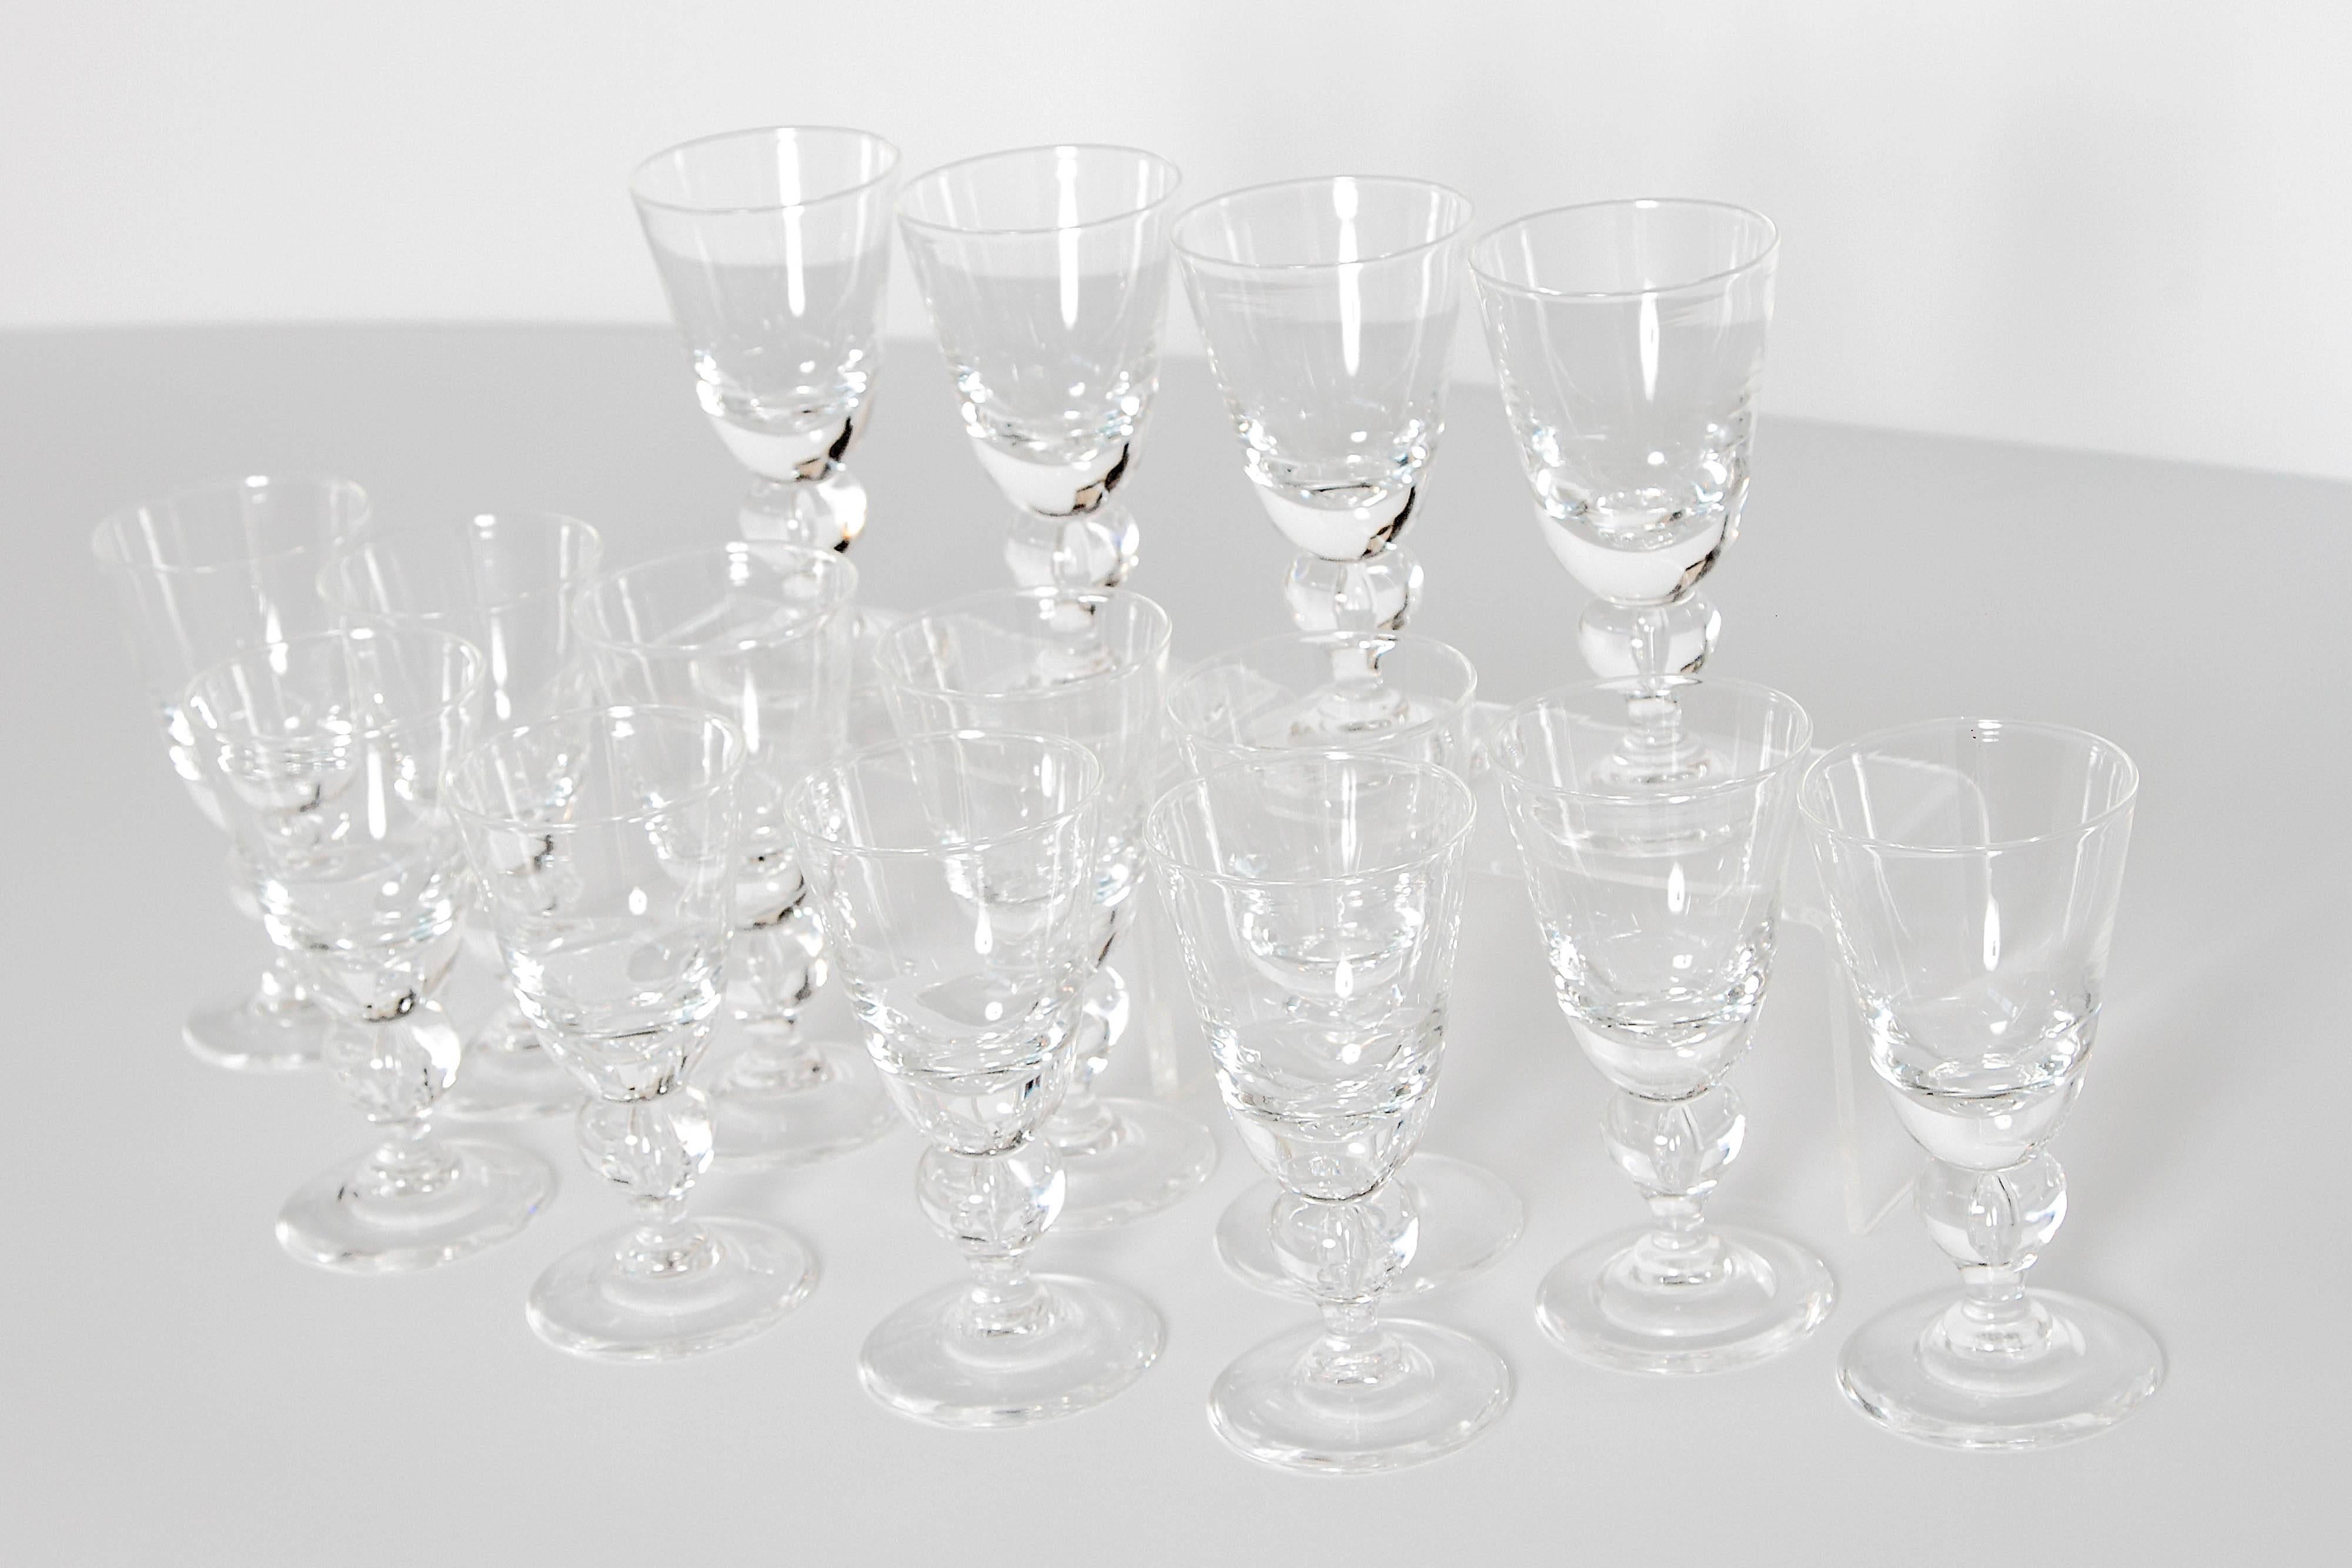 A set of 15 water goblets designed by George Thompson for Steuben Glass Works. The design is known as #7877 and was introduced in 1940. The goblets feature a baluster know in the stem with a captured bubble reminiscent of those used in Colonial